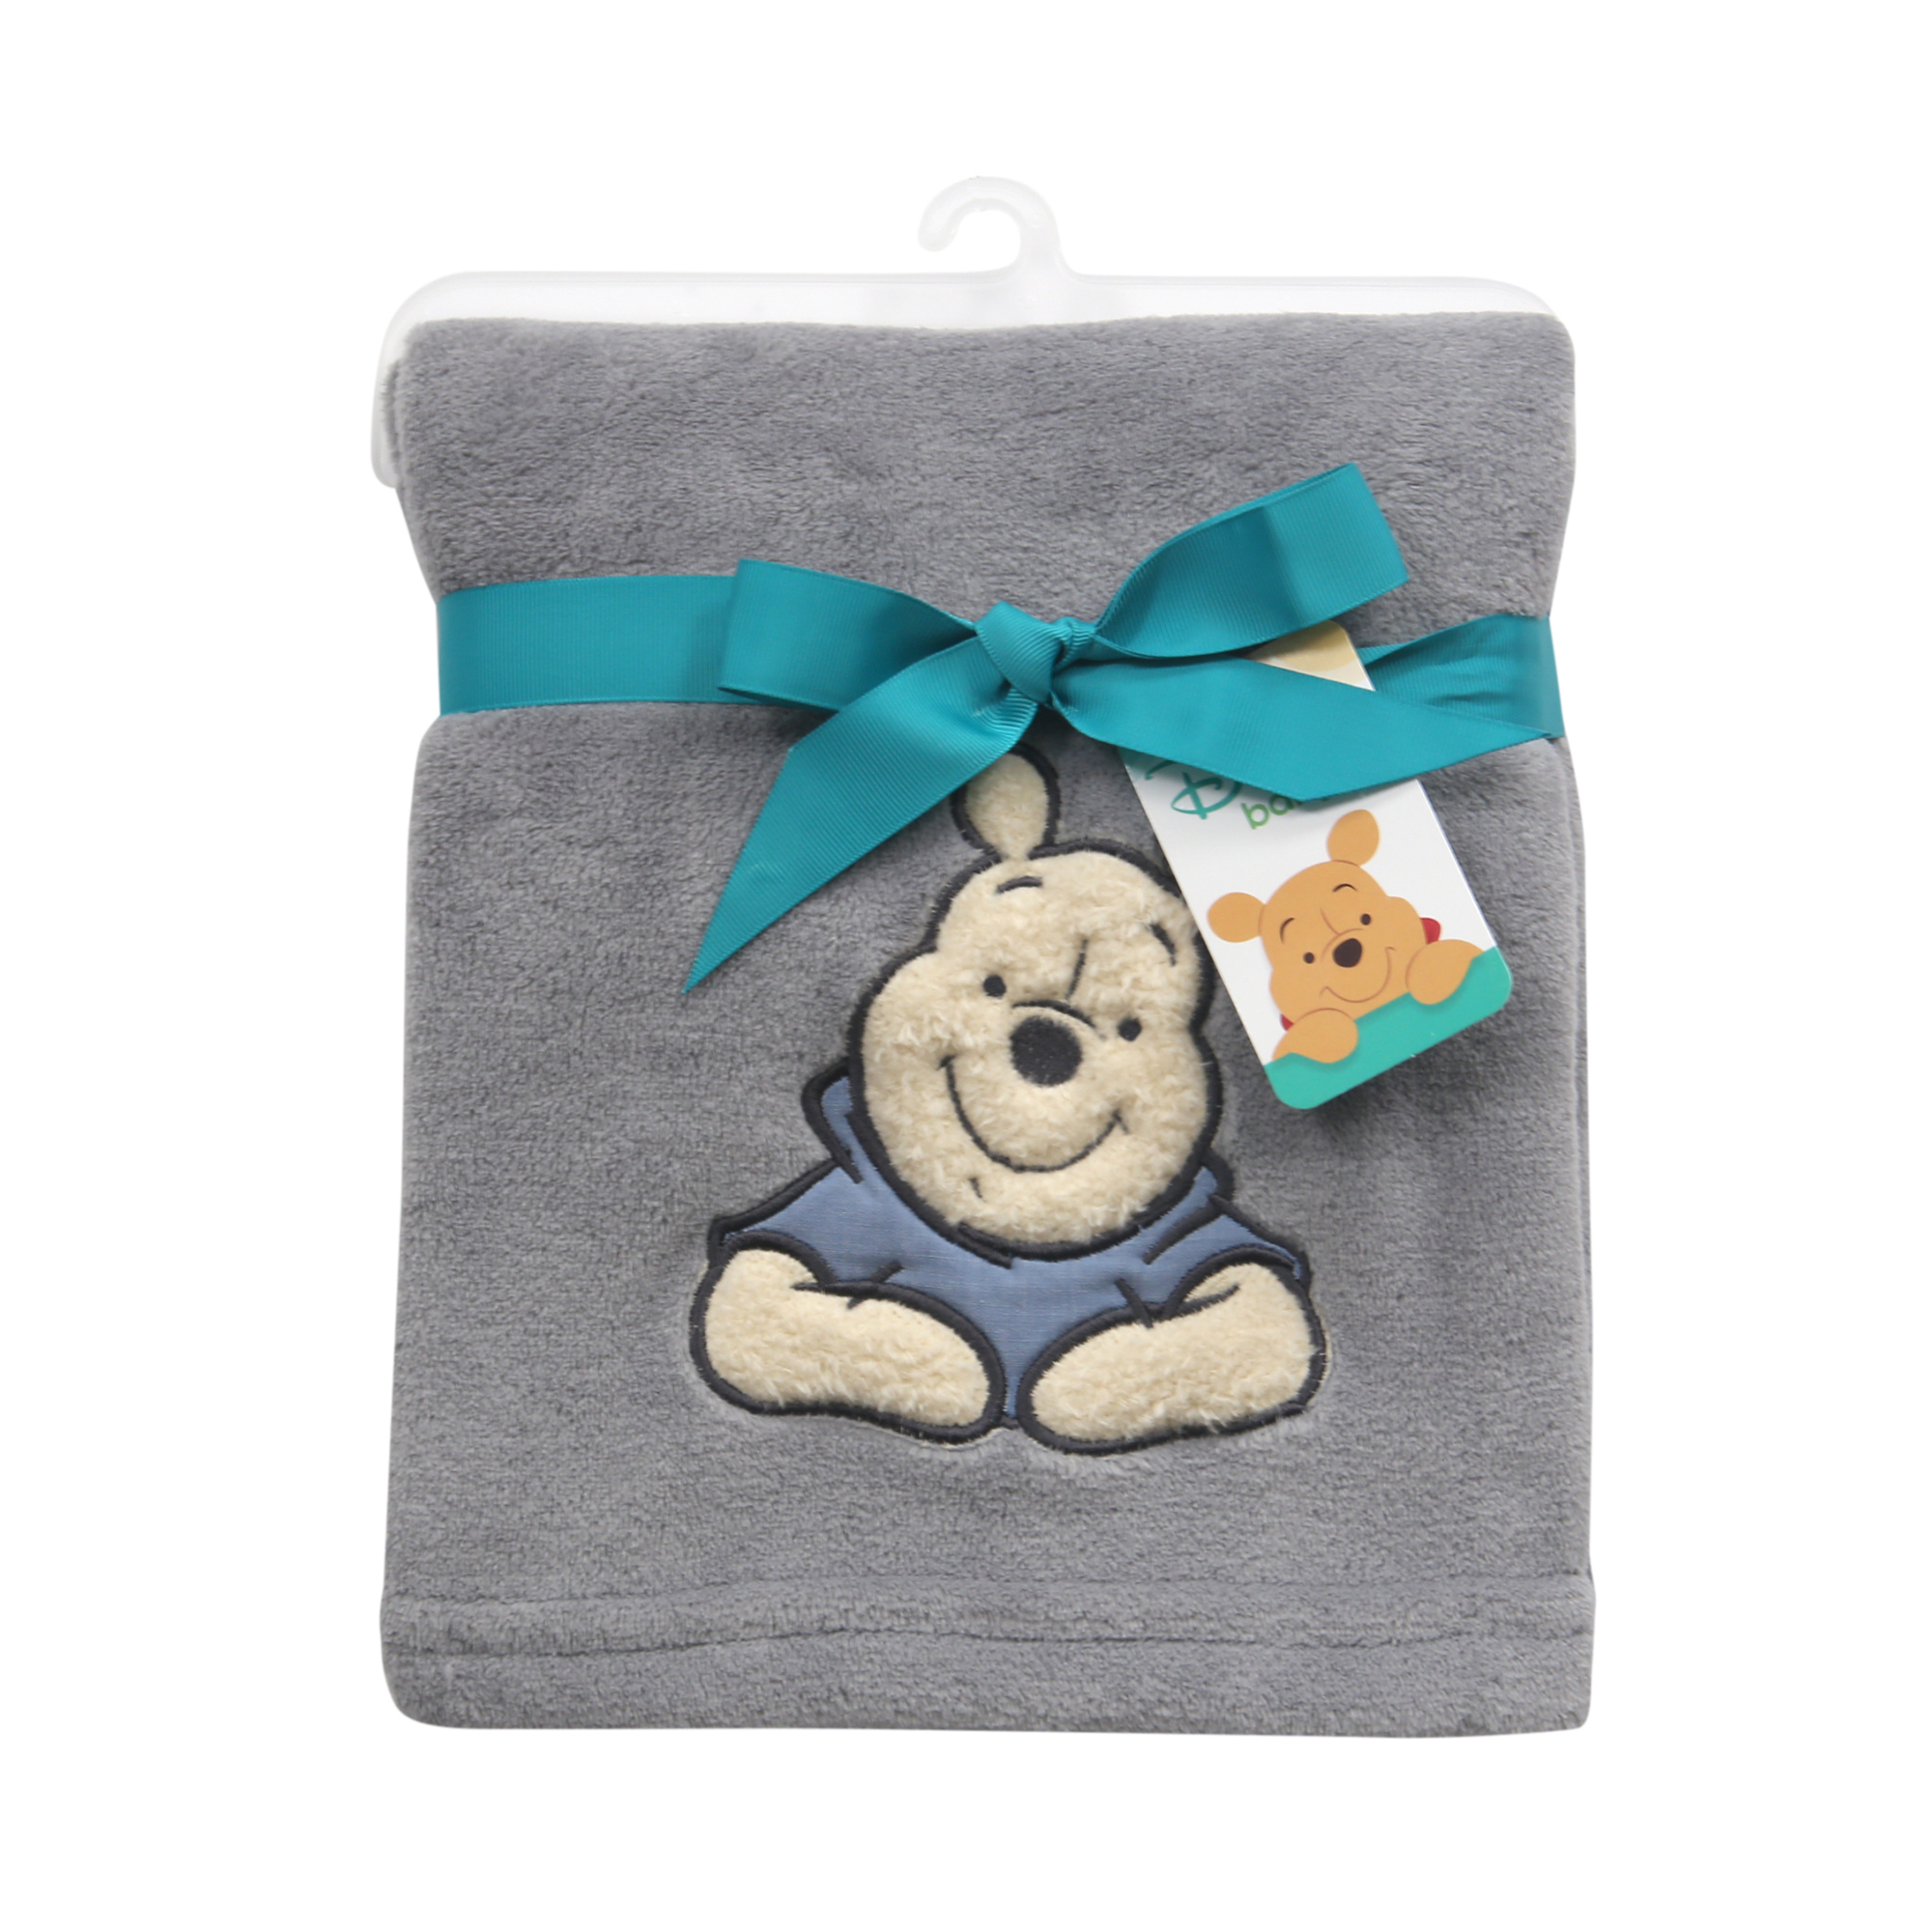 Lambs & Ivy Forever Pooh Baby Blanket - image 3 of 5